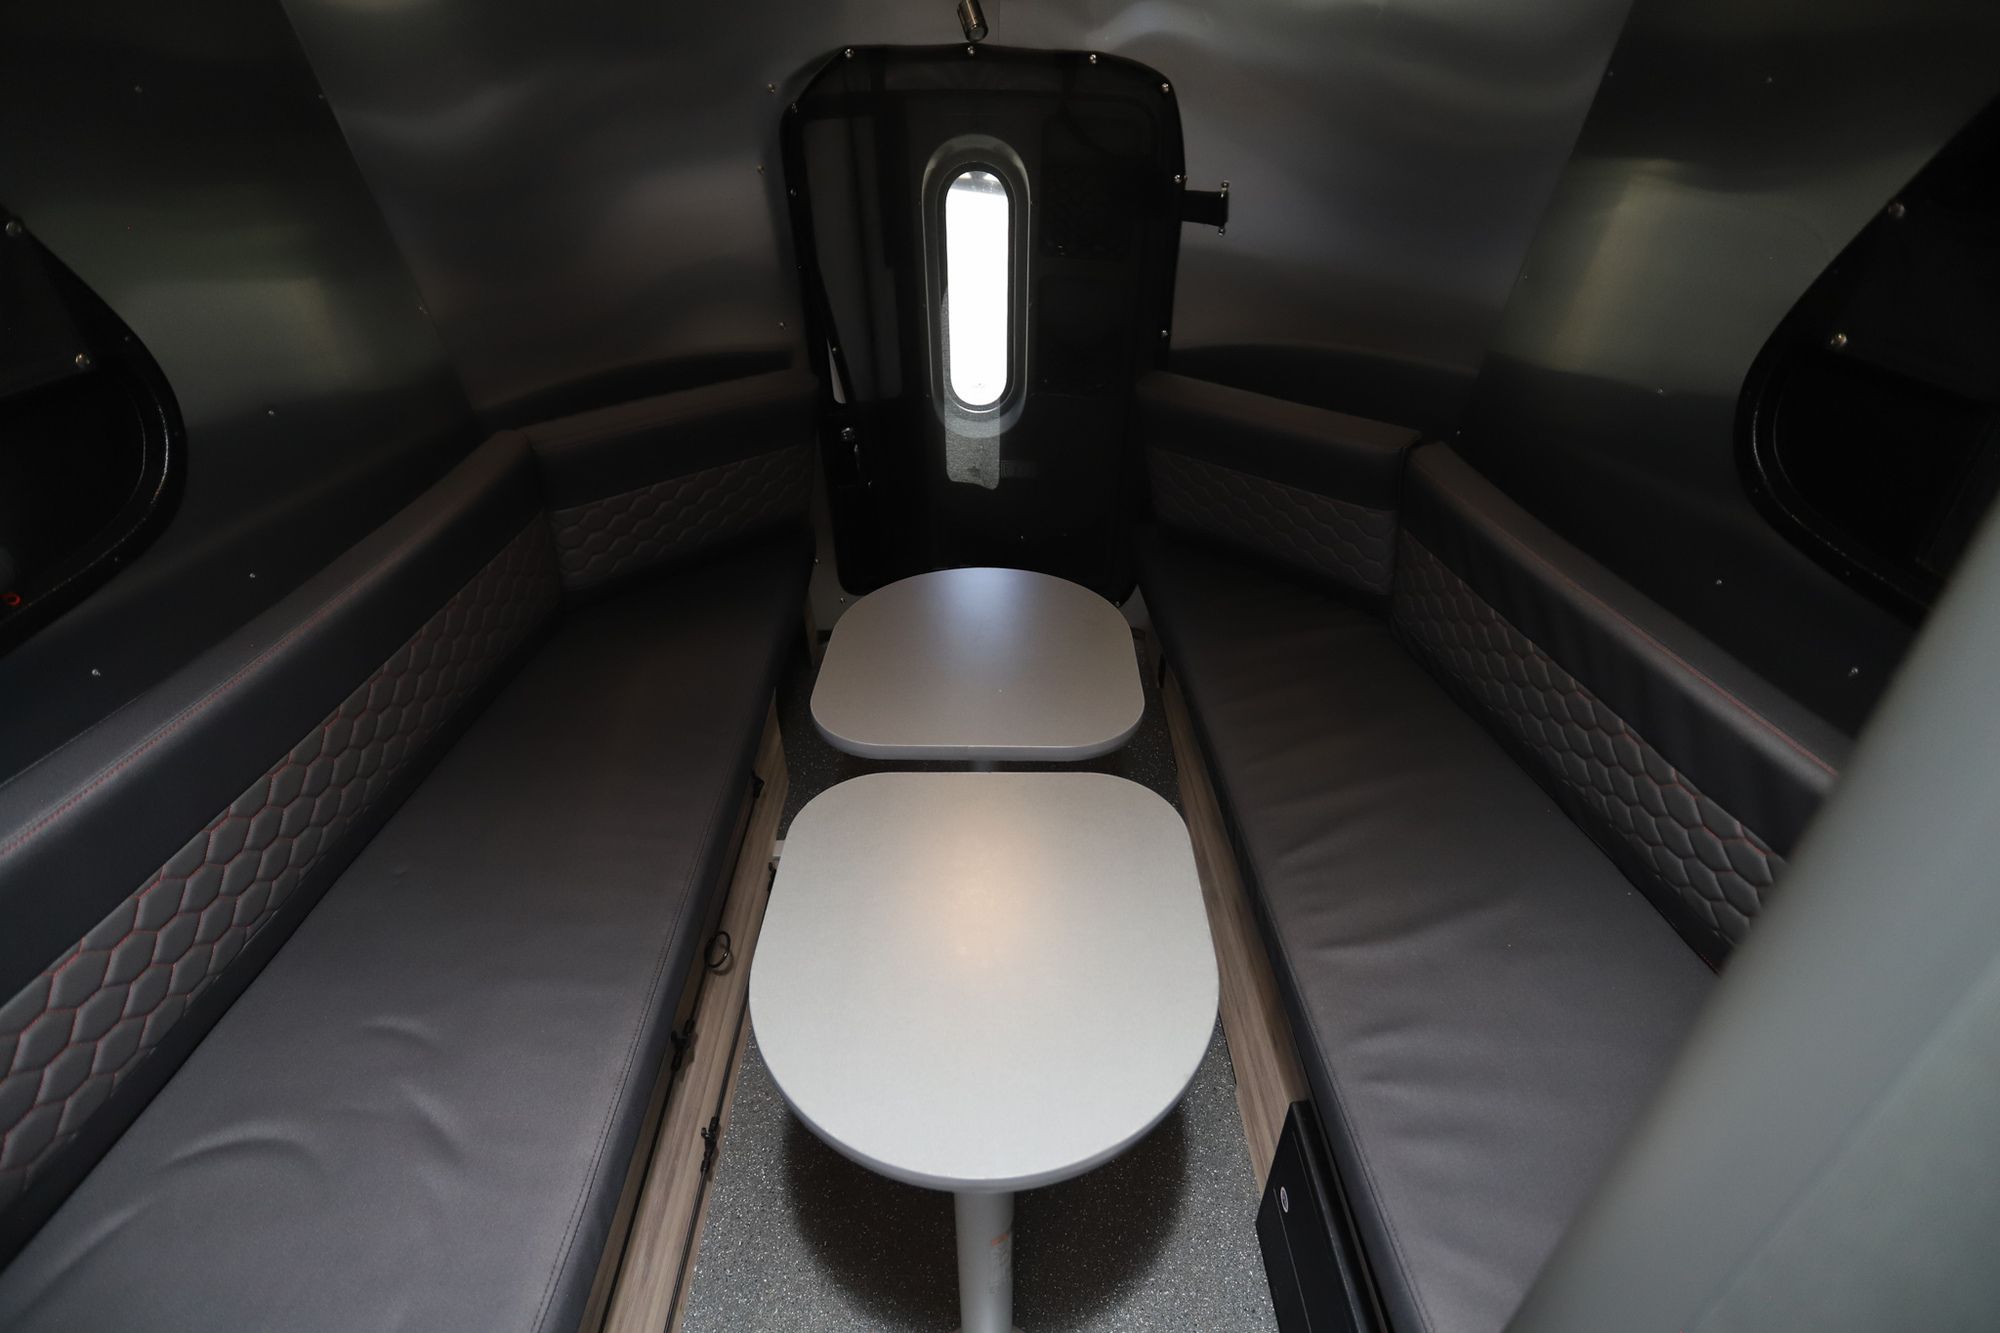 Used 2019 Airstream Basecamp 16 X Travel Trailer  For Sale